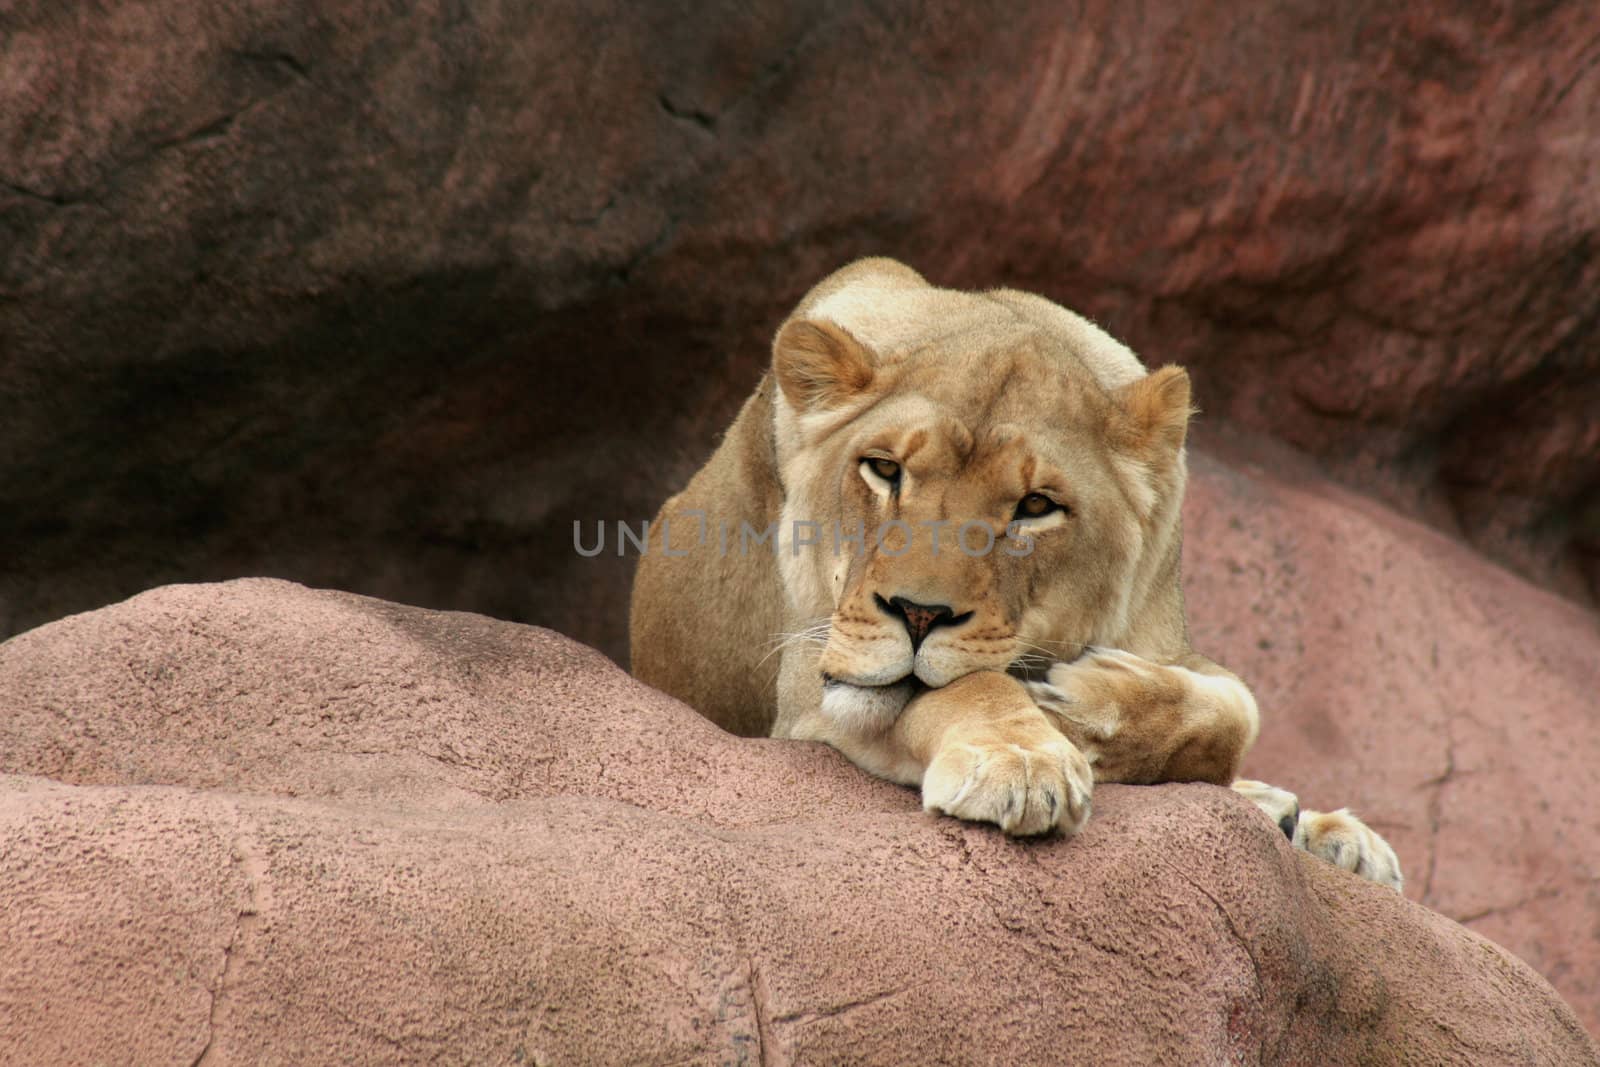 A lioness just waking up on a large rock.
